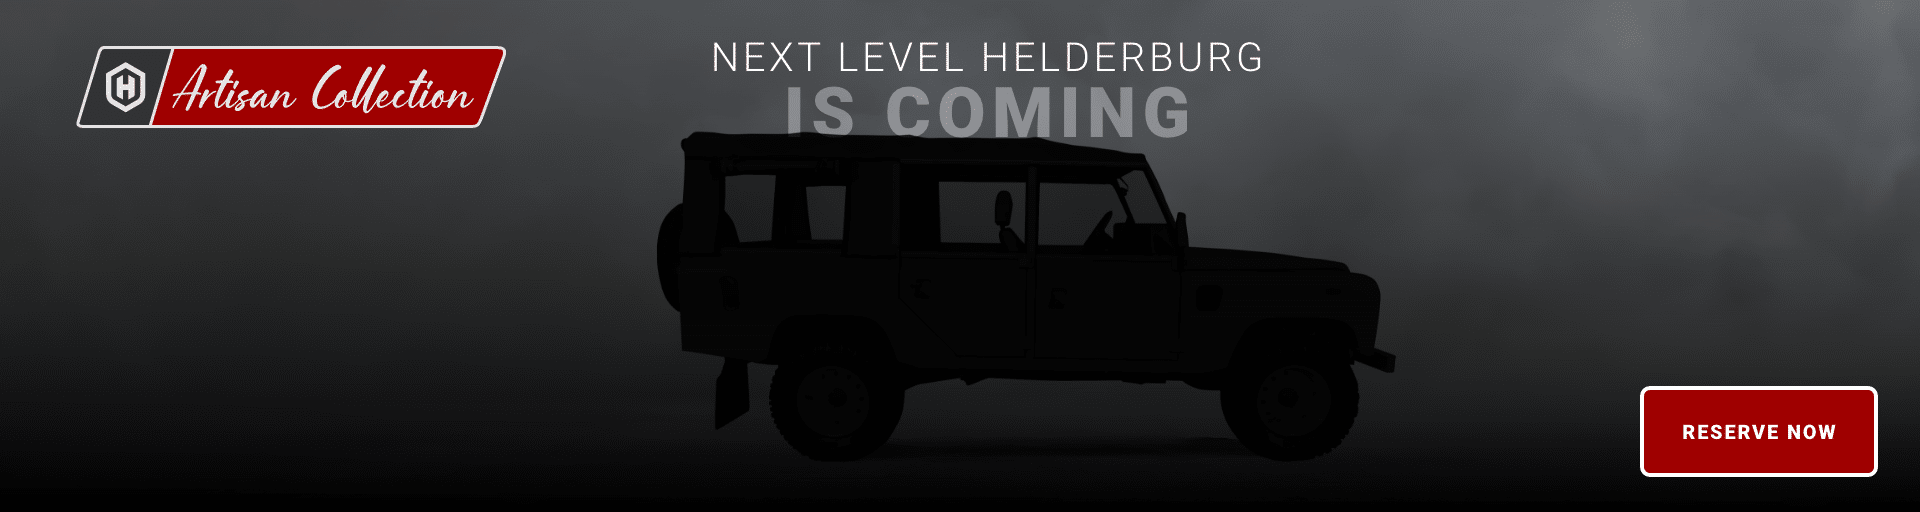 Artisan Collection - Next level Helderburg is Coming - Reserve Now